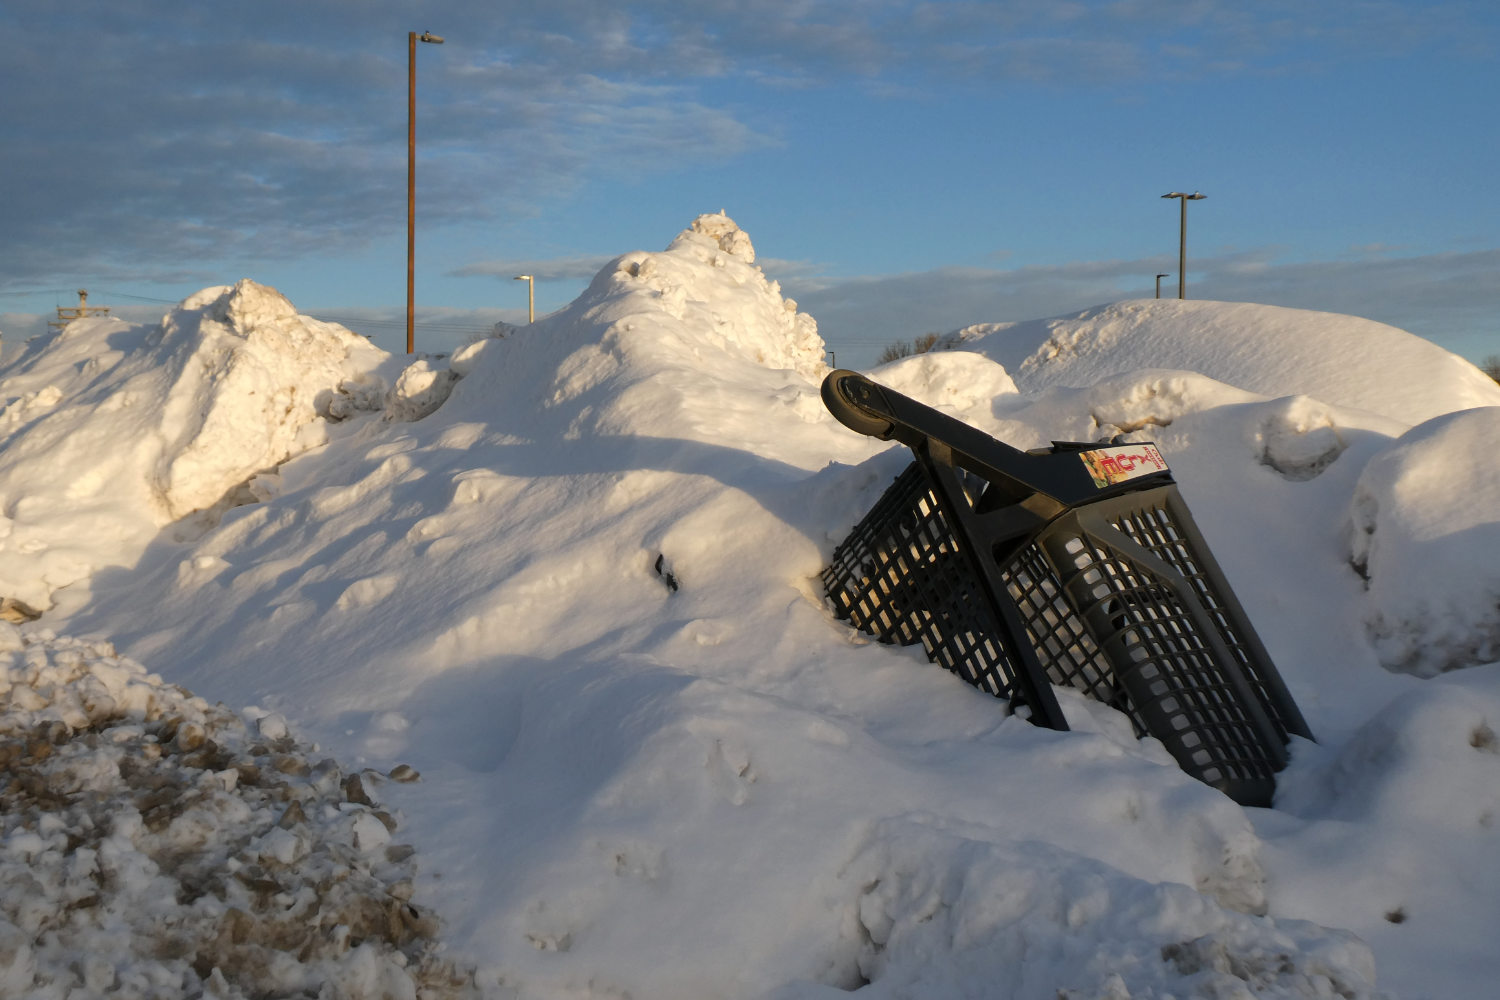 Tall mounds of snow with an inverted shop cart sticking out against a blue sky